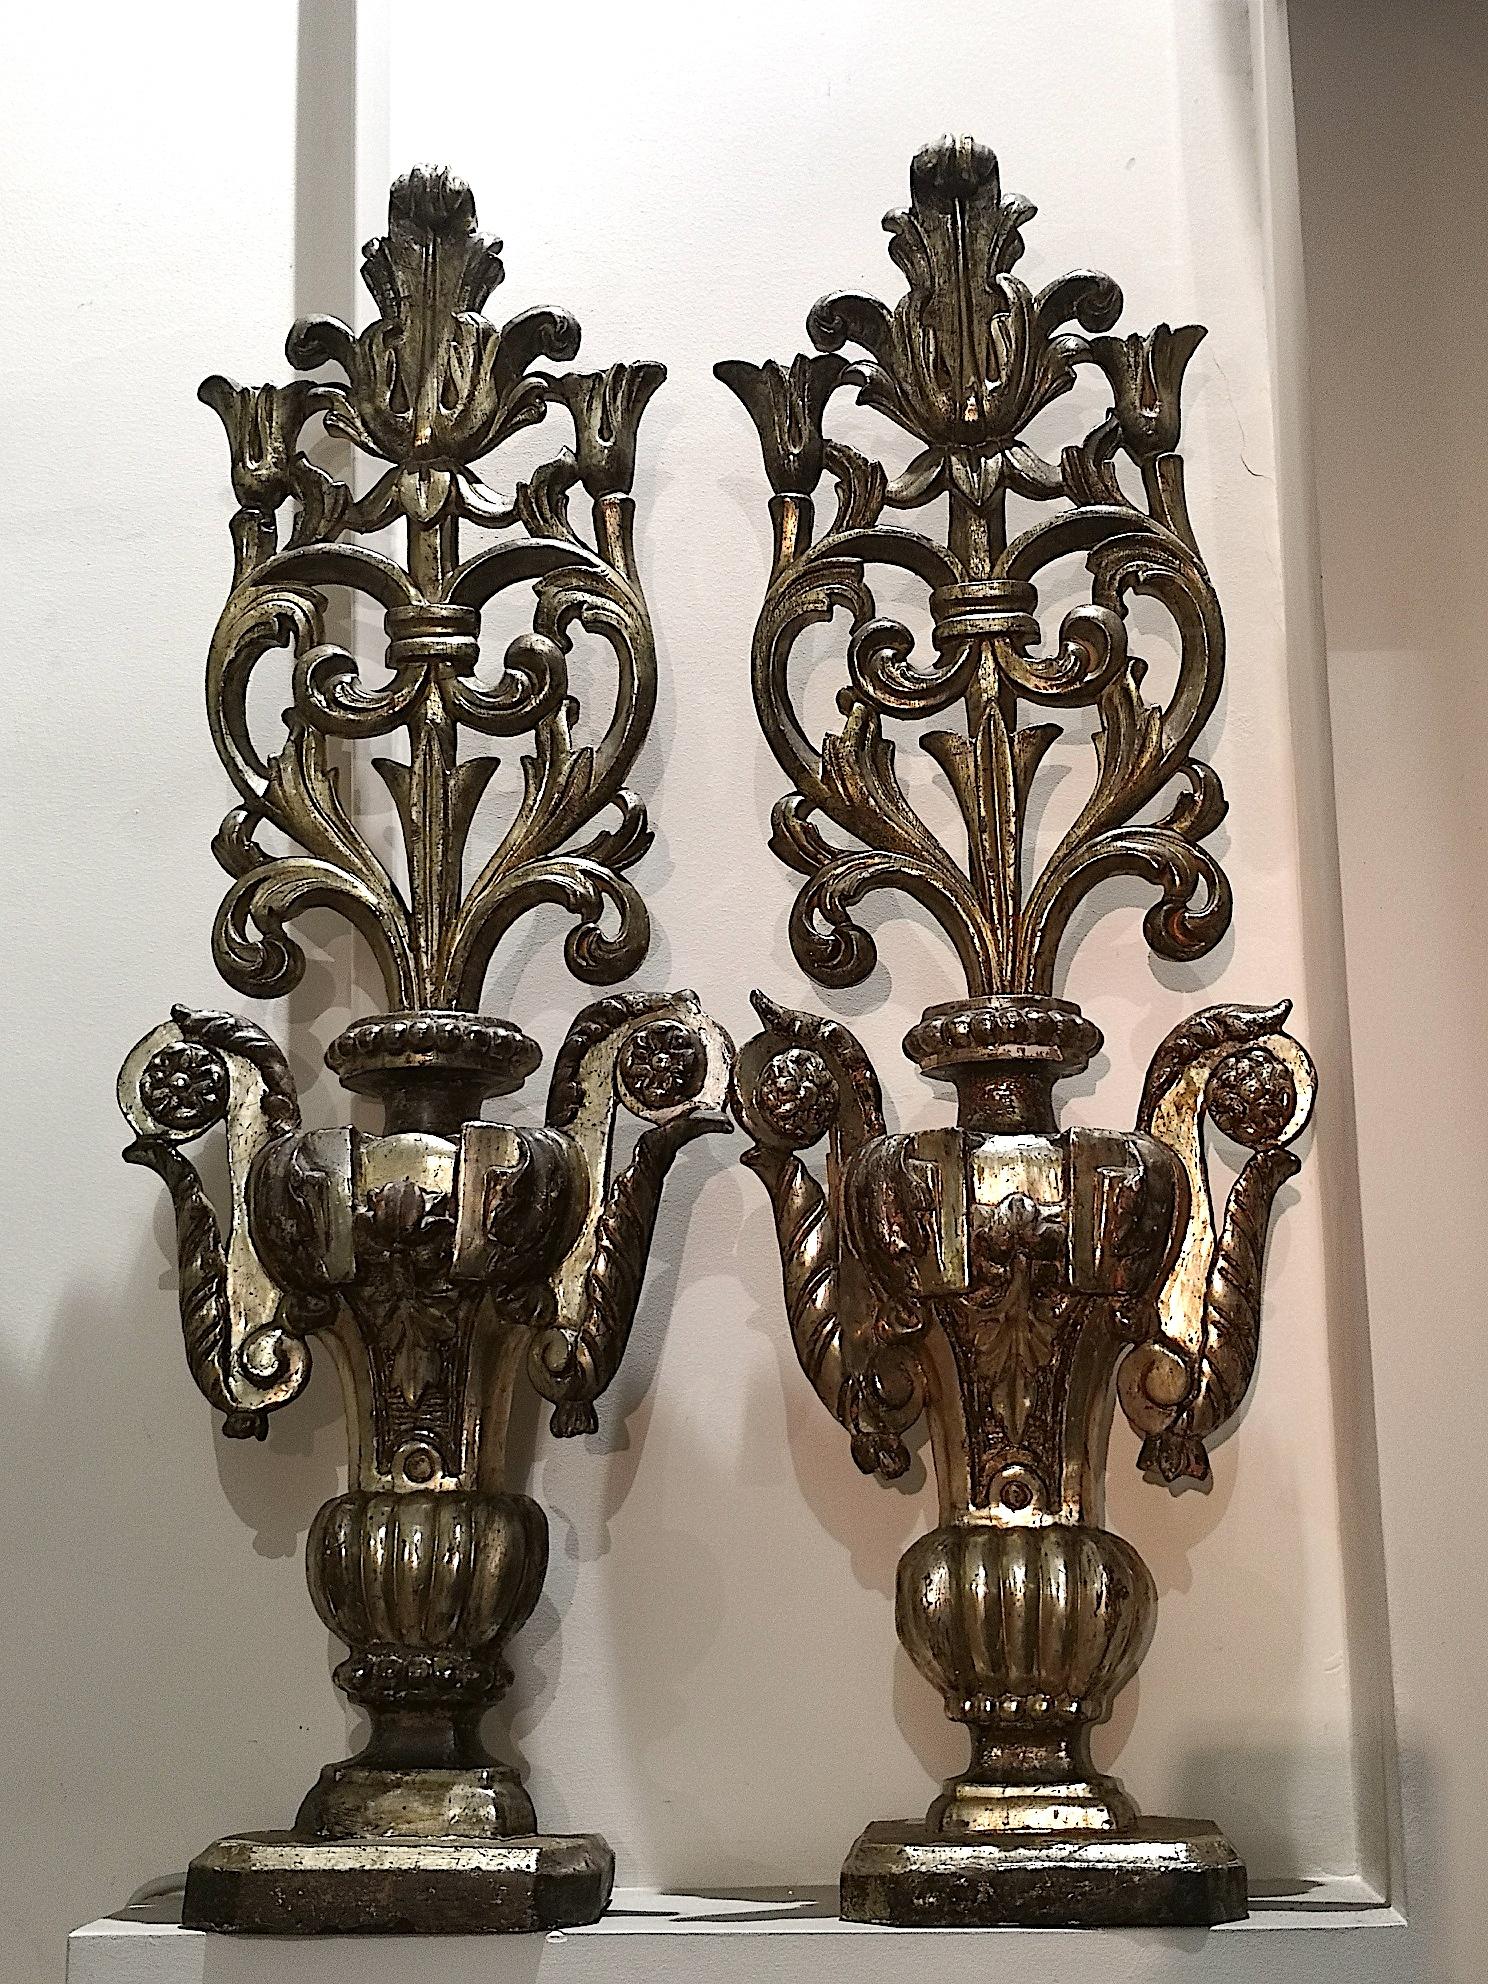 A beautiful pair of carved Italian church altar ornaments in gilt mecca silver leaf from the last quarter of the 18th century and in the Luise XVI manner. Each ornament measures 8.26 inches wide, 37.40 inches high and 5.5 inches deep. They are